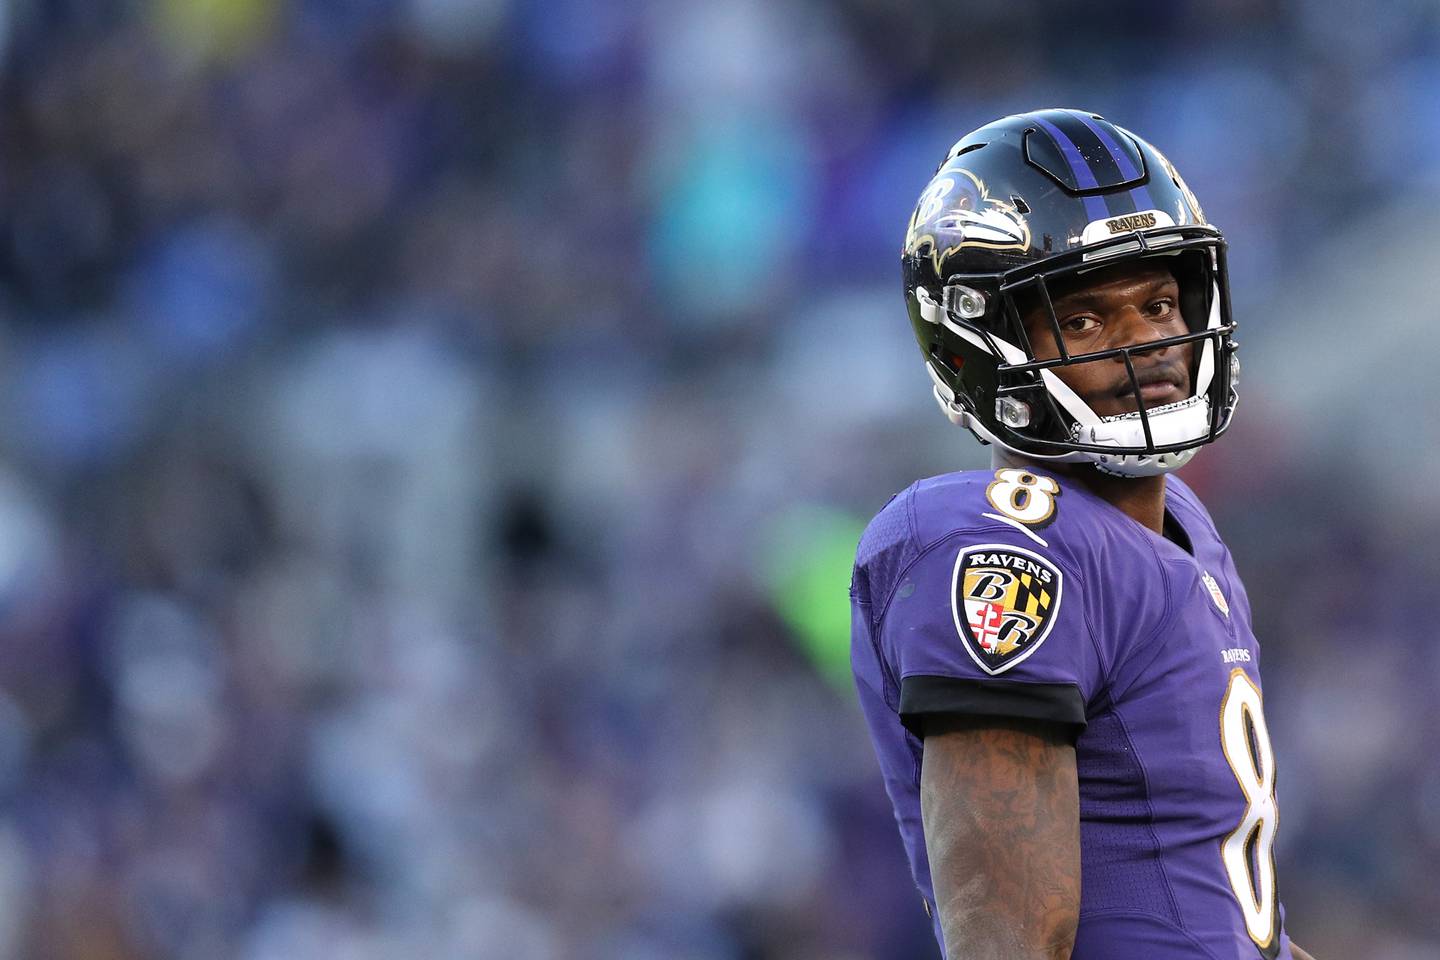 BALTIMORE, MARYLAND - JANUARY 06: Quarterback Lamar Jackson #8 of the Baltimore Ravens in action against the Los Angeles Chargers during the AFC Wild Card Playoff game at M&T Bank Stadium on January 06, 2019 in Baltimore, Maryland.